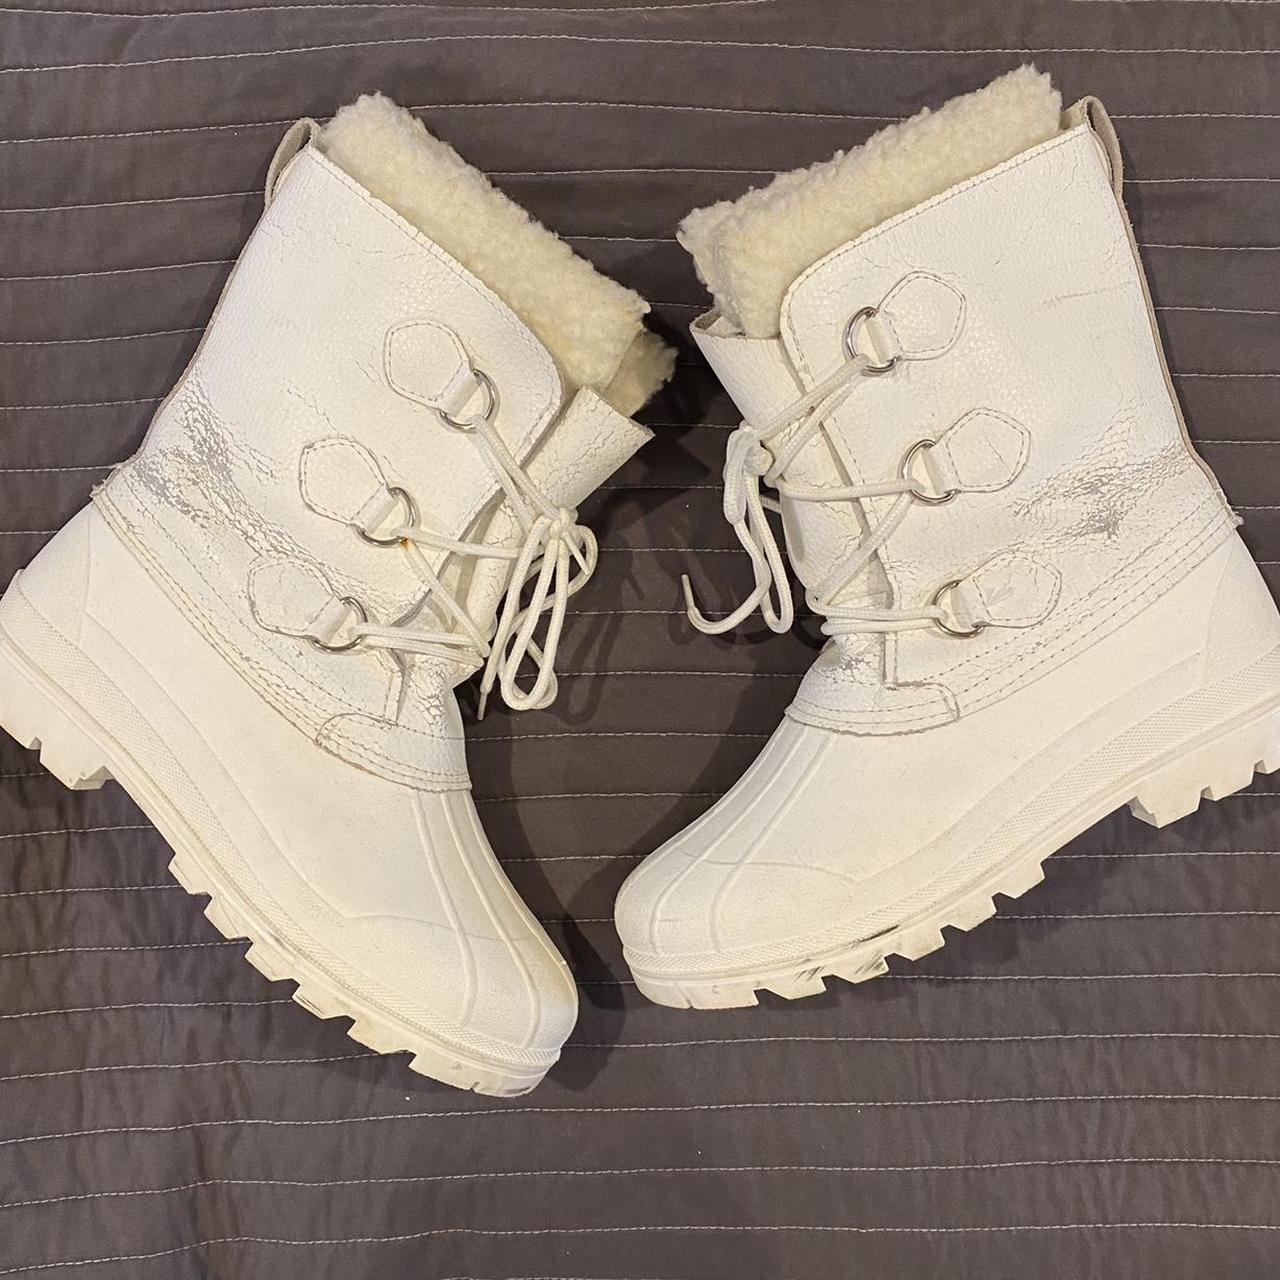 All White Snow/Winter Boots (Great condition just... - Depop